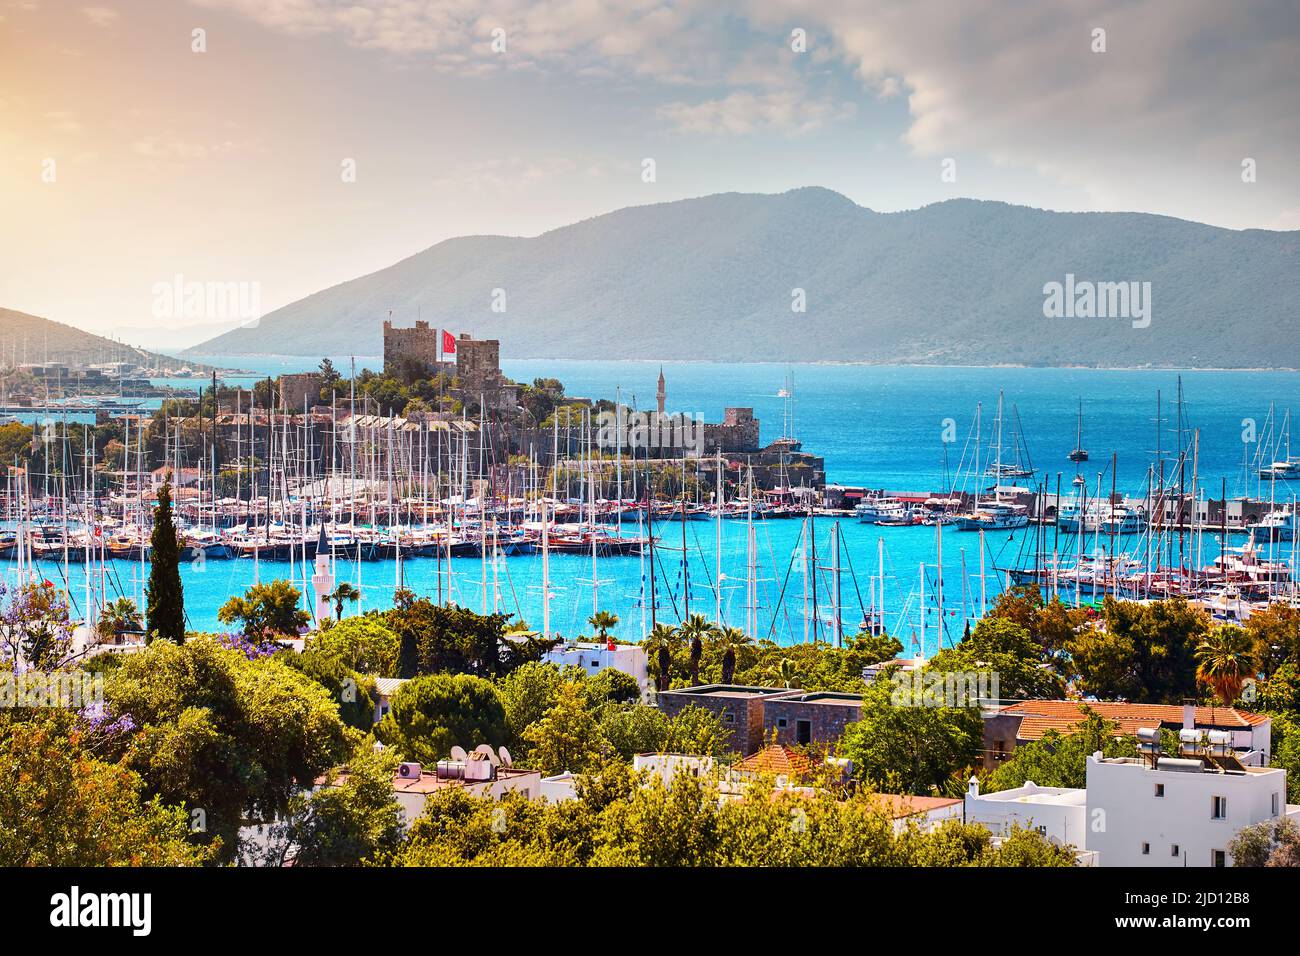 View of Bodrum castle and Marina Harbor in Aegean sea with sail boats and hills at background in Turkey Stock Photo